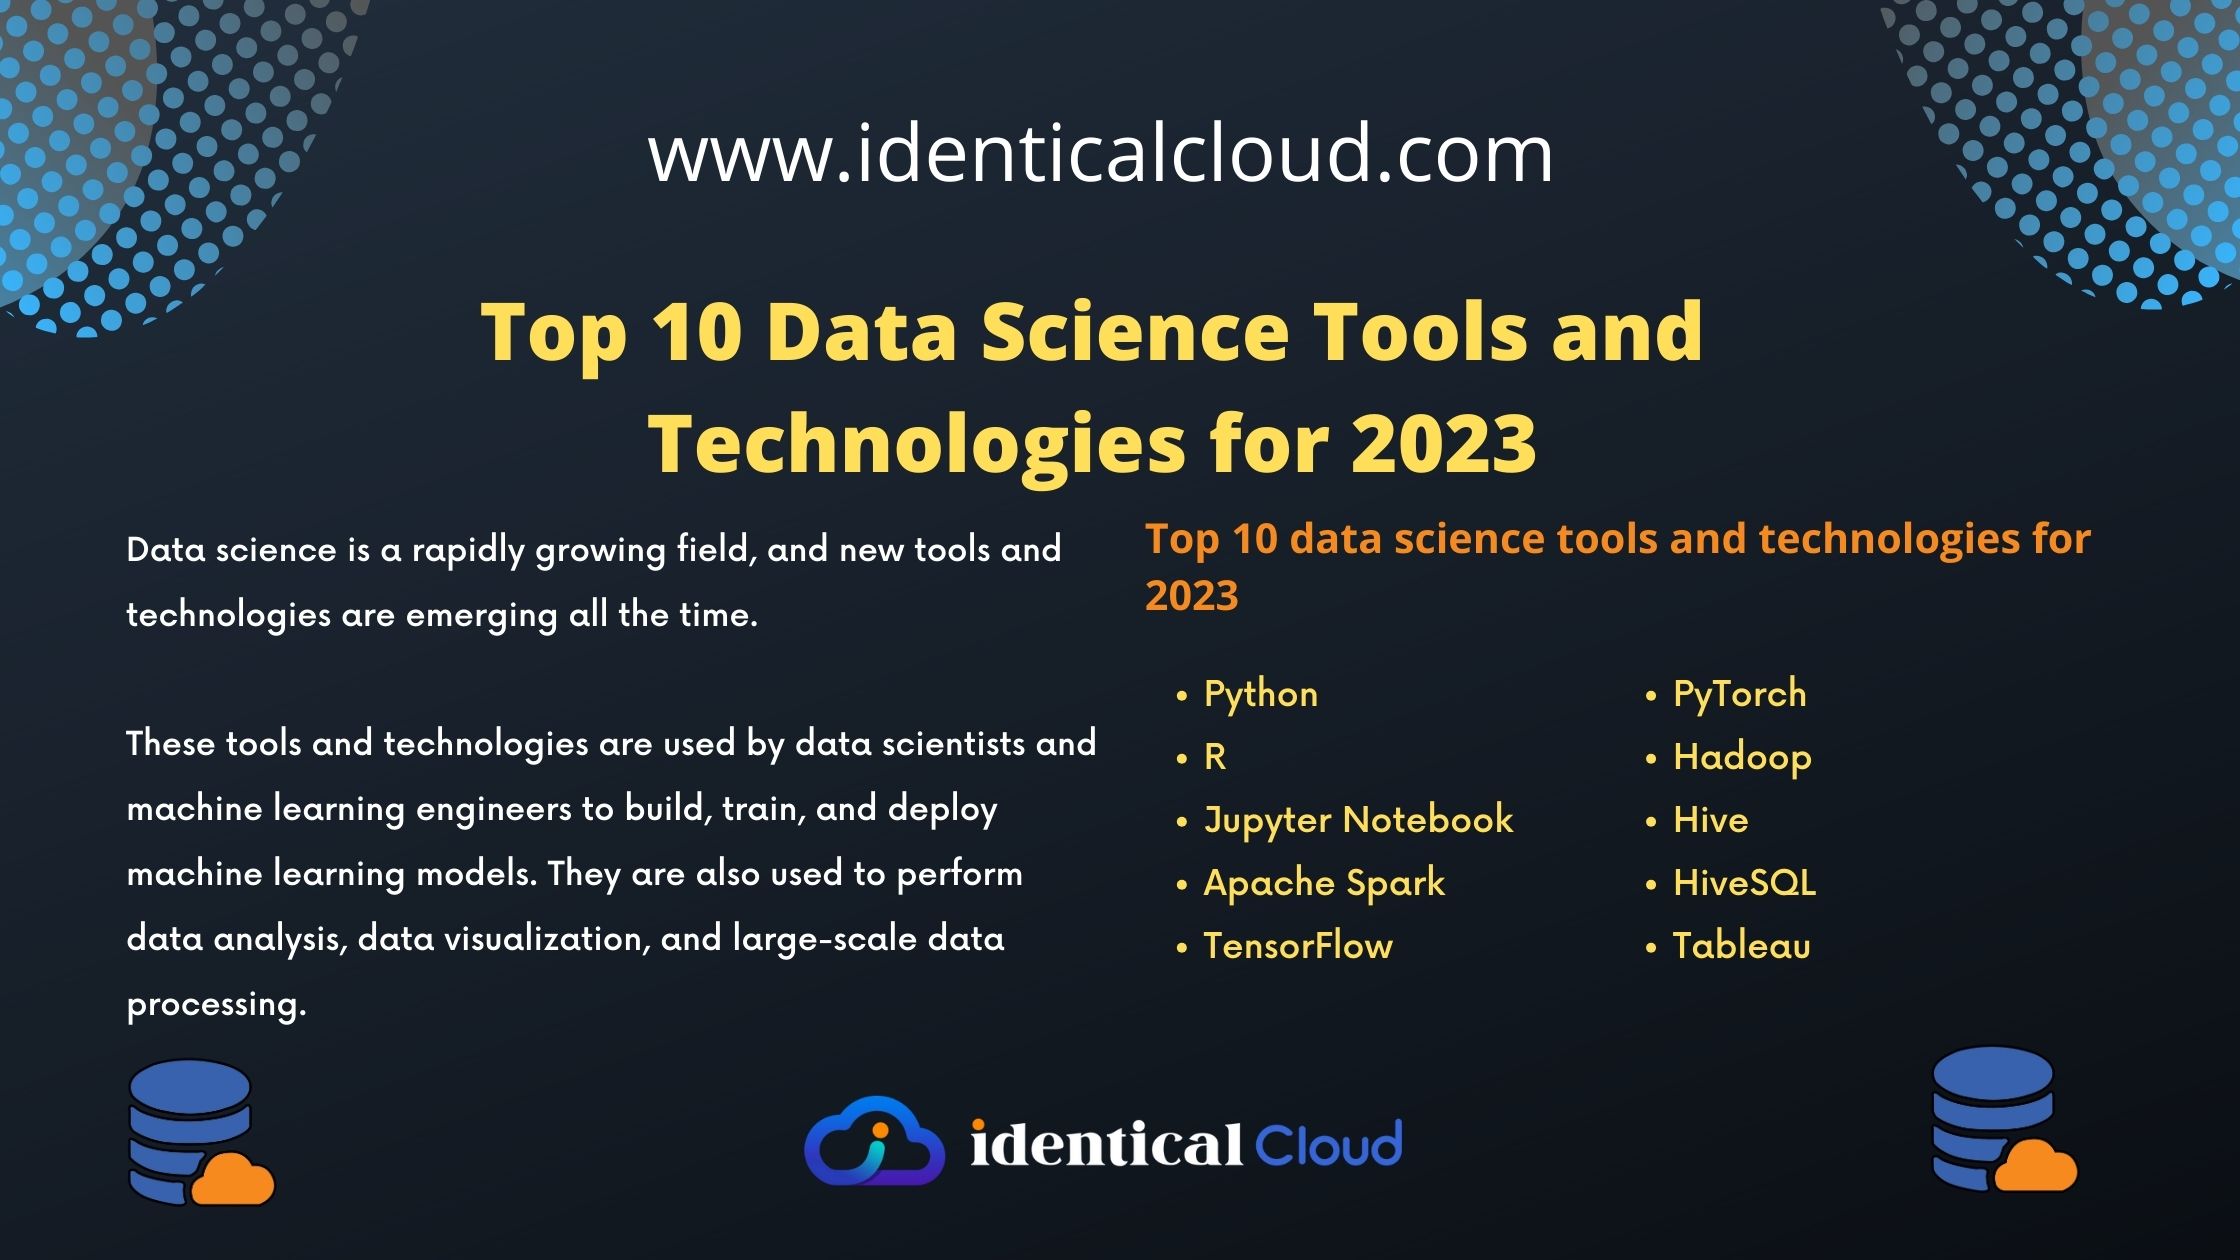 Top 10 Data Science Tools and Technologies for 2023 - identicalcloud.com